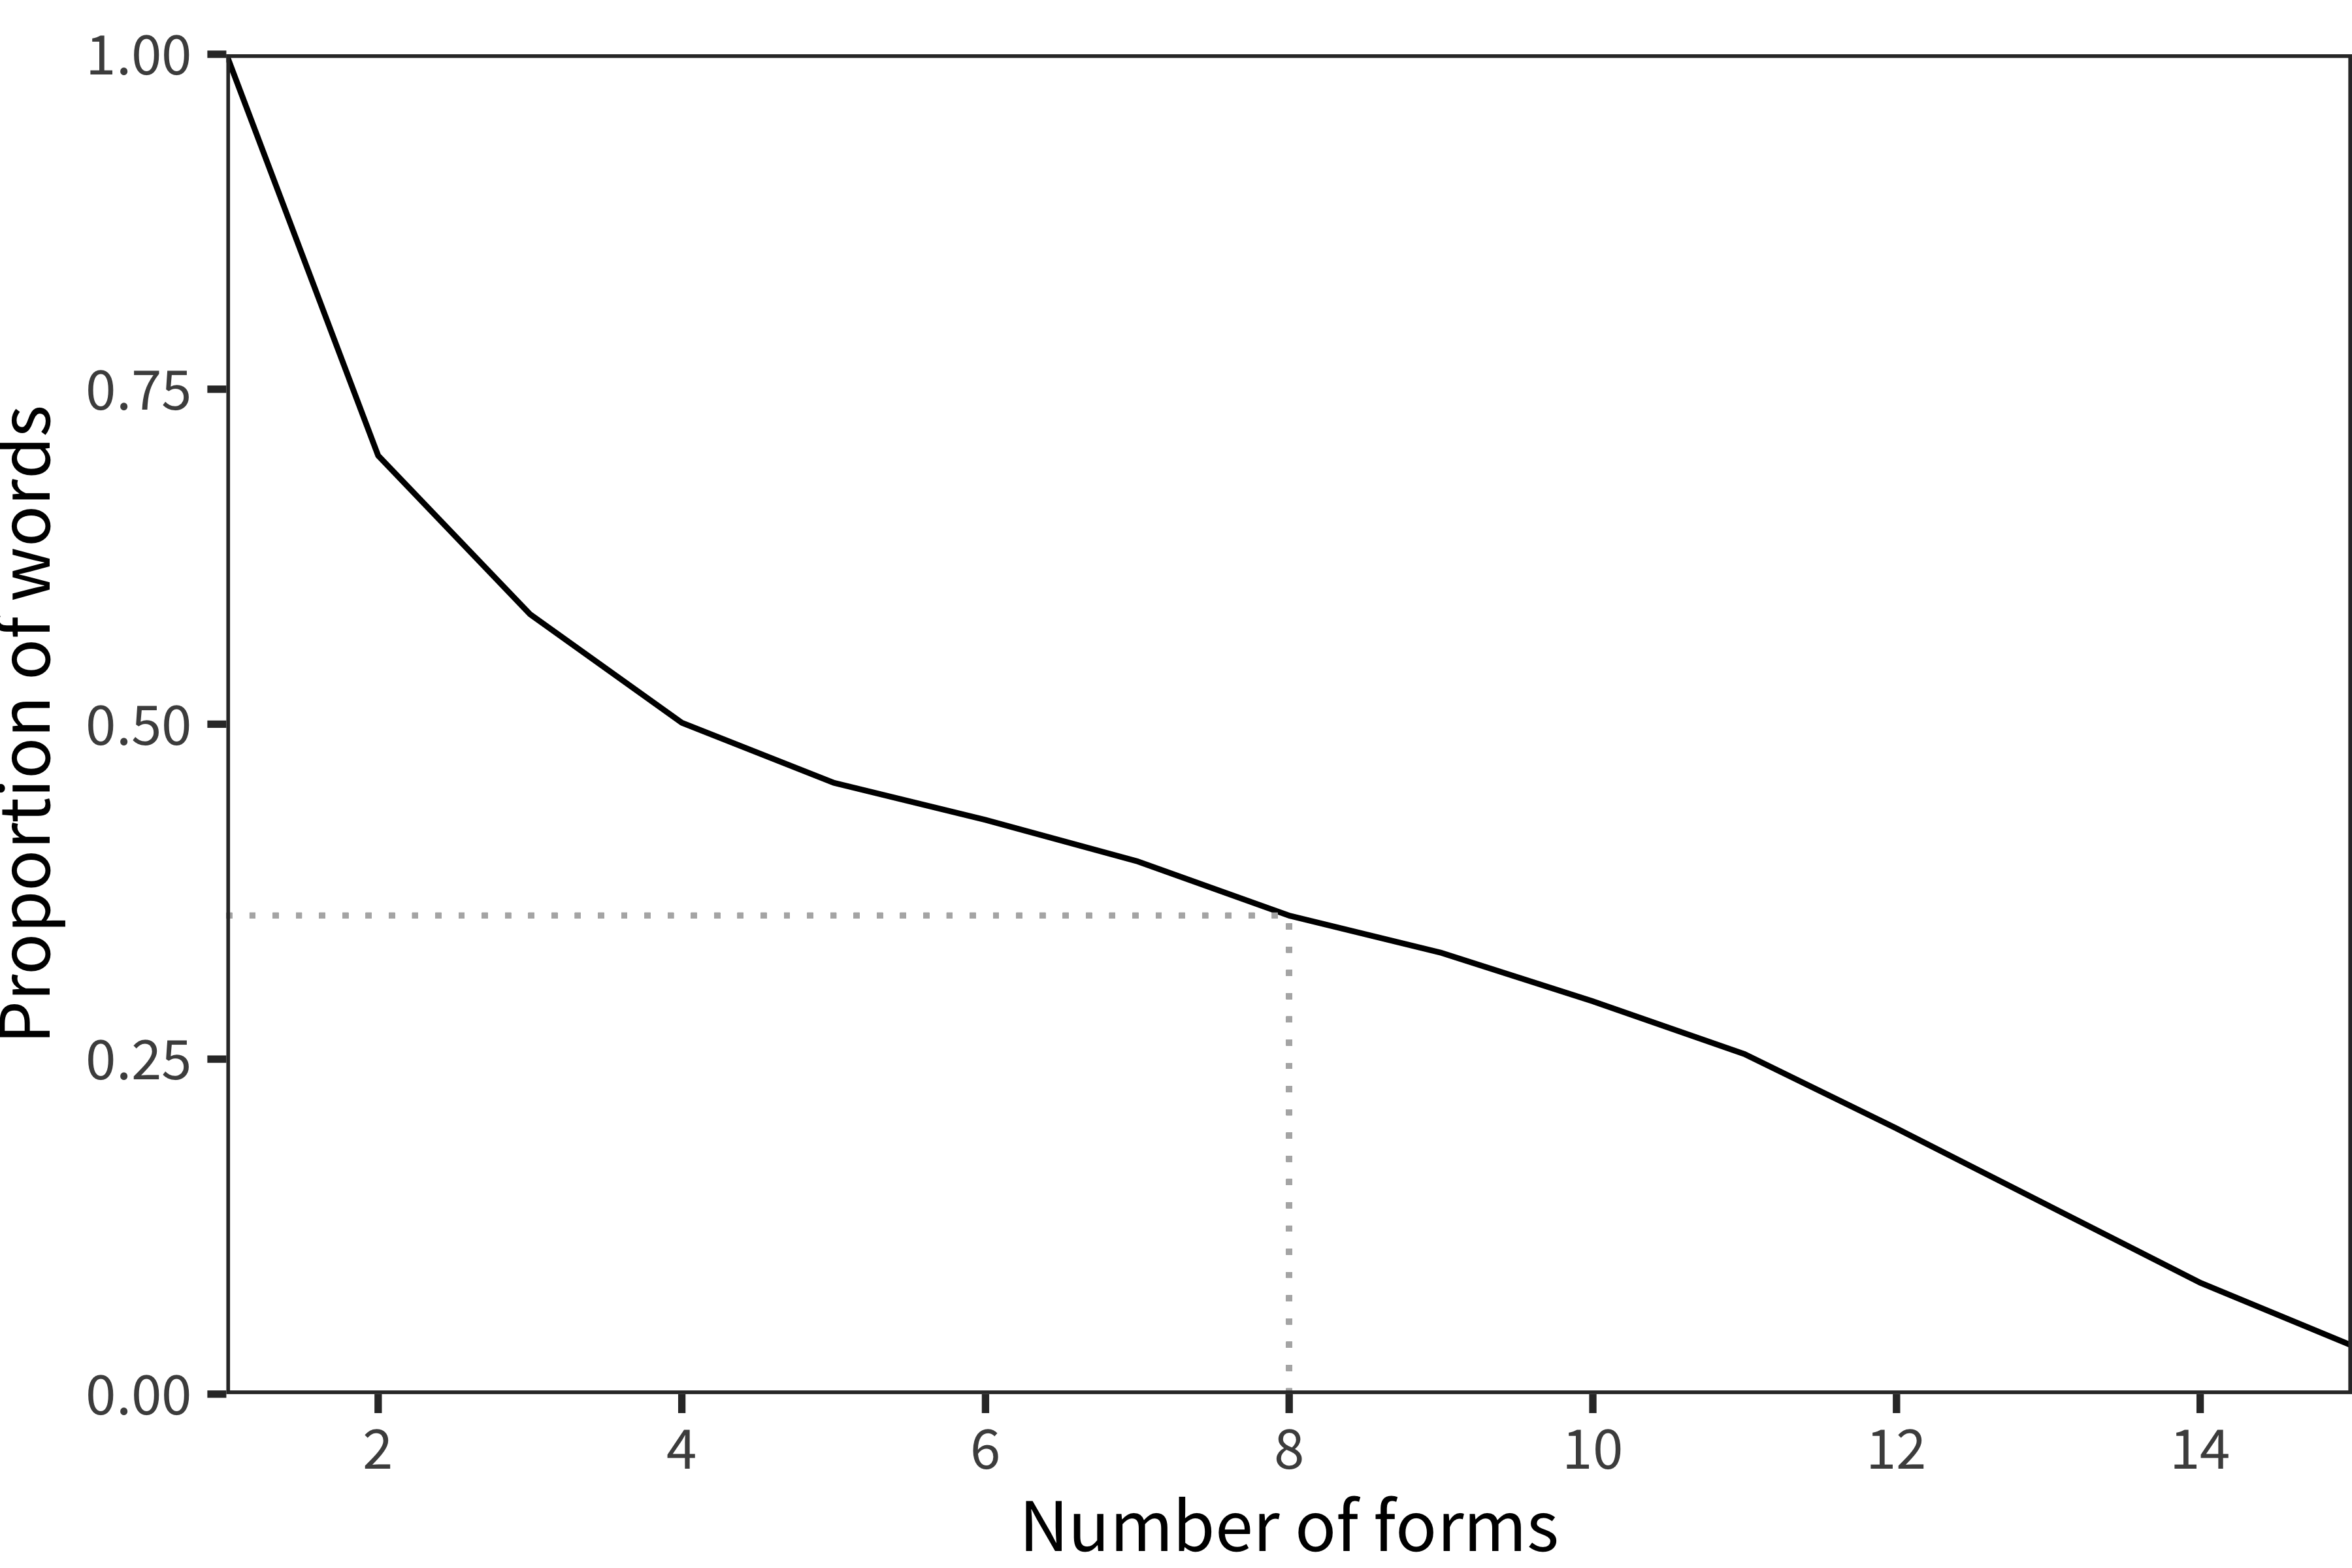 The proportion of words found on at least each of a number of languages' CDI forms (e.g. all words appear on at least one form, 111 words appear on at least 2 forms, and so on, with 34 words appearing on all 15 languages' forms). The dotted line shows the cutoff value we chose (8).